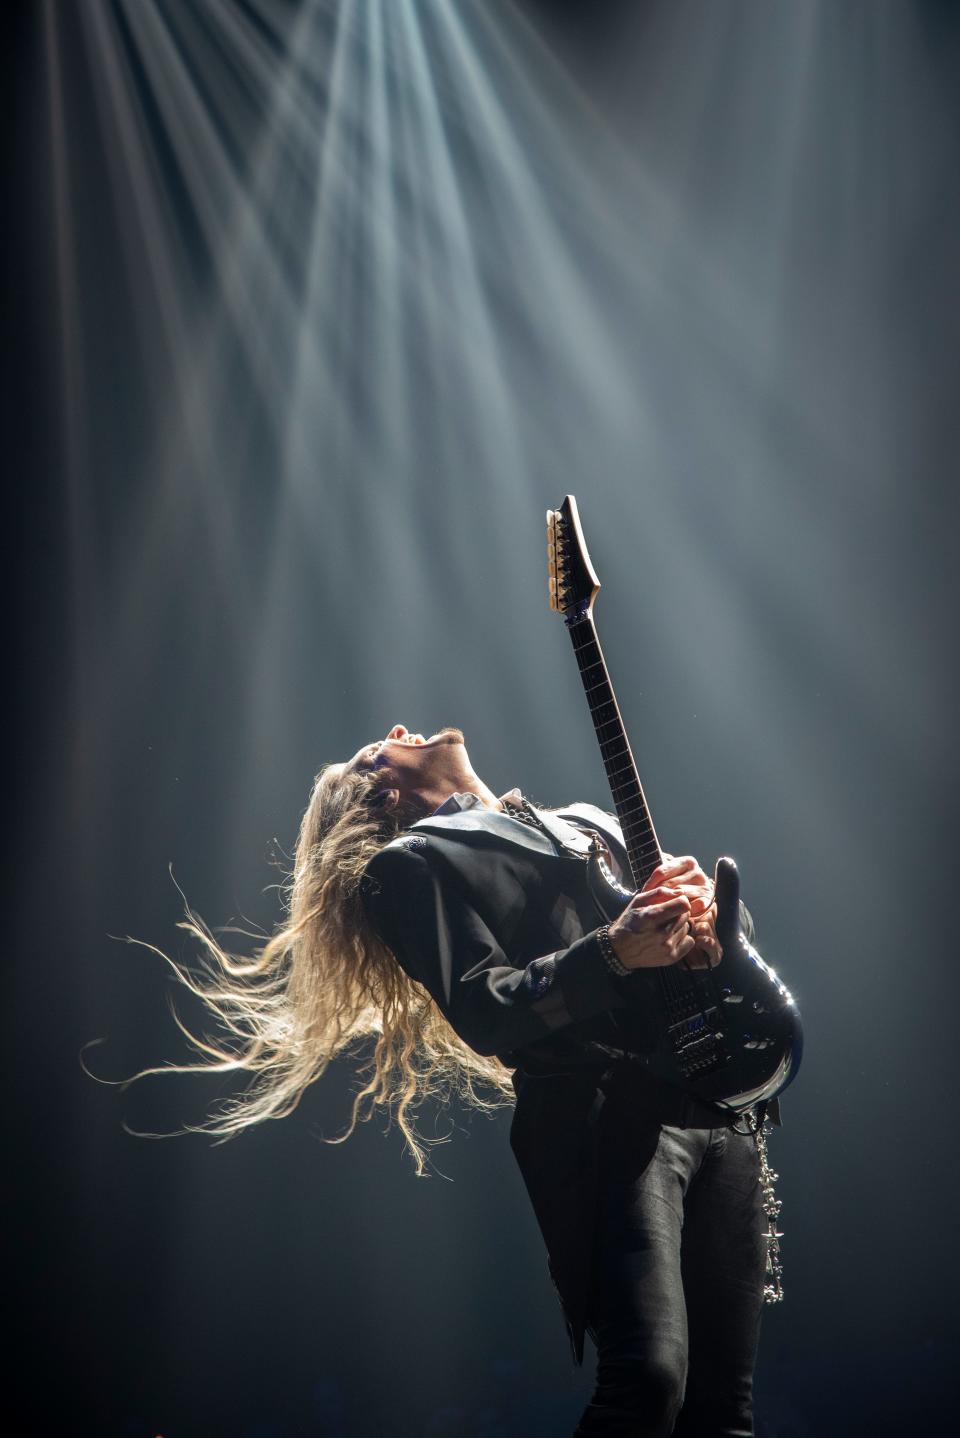 The Trans-Siberian Orchestra melds rock music with holiday fare.